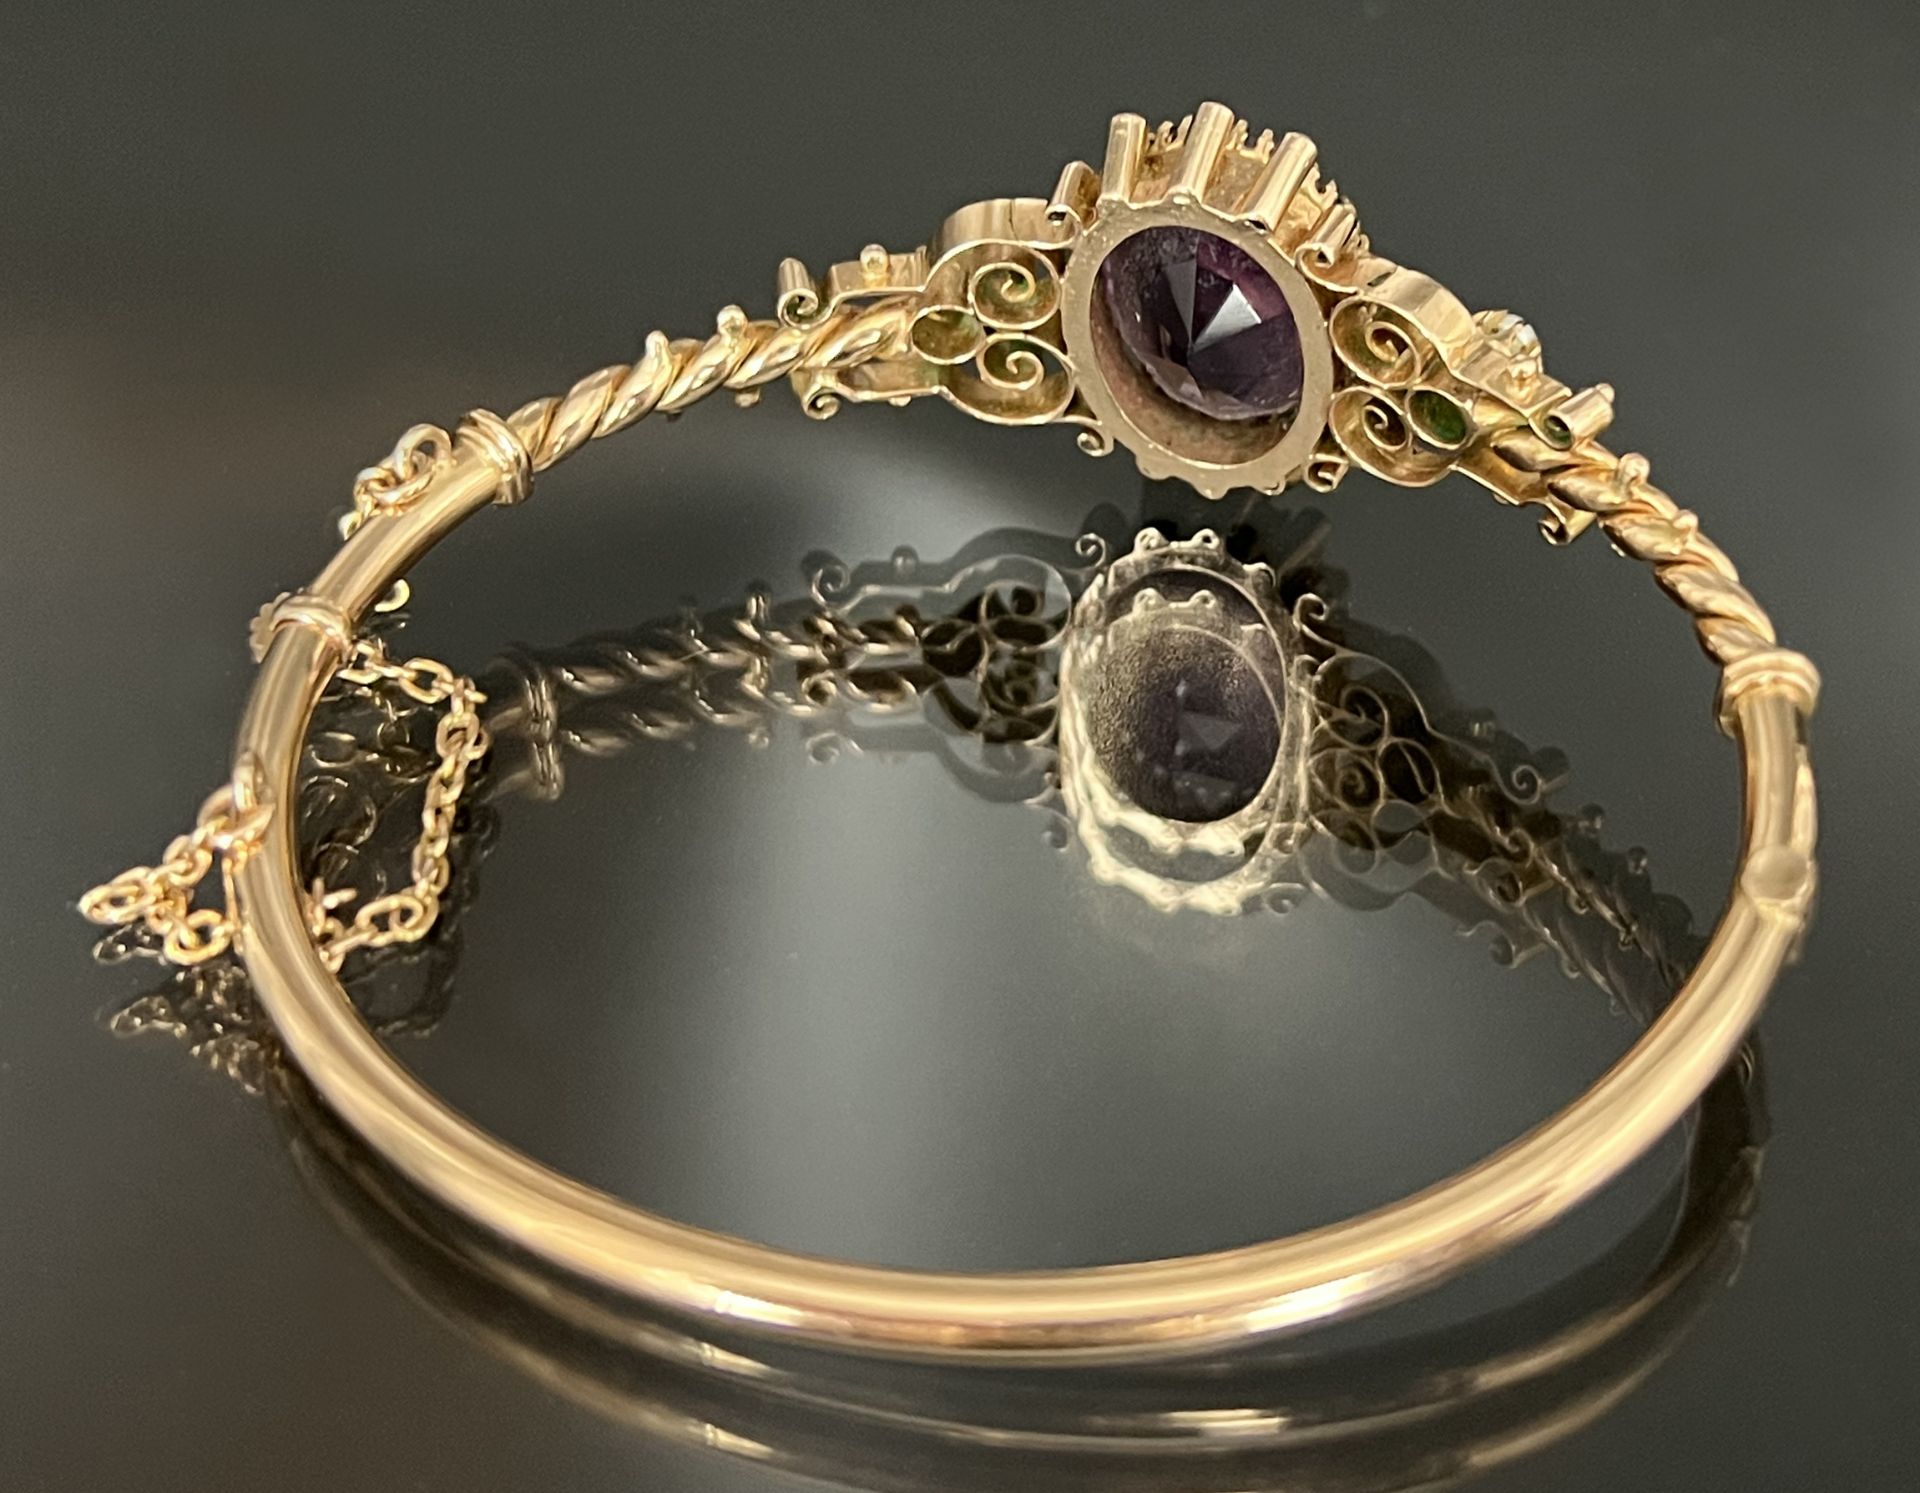 Bangle 585 rose gold with a large amethyst and two small pearls. - Image 2 of 4